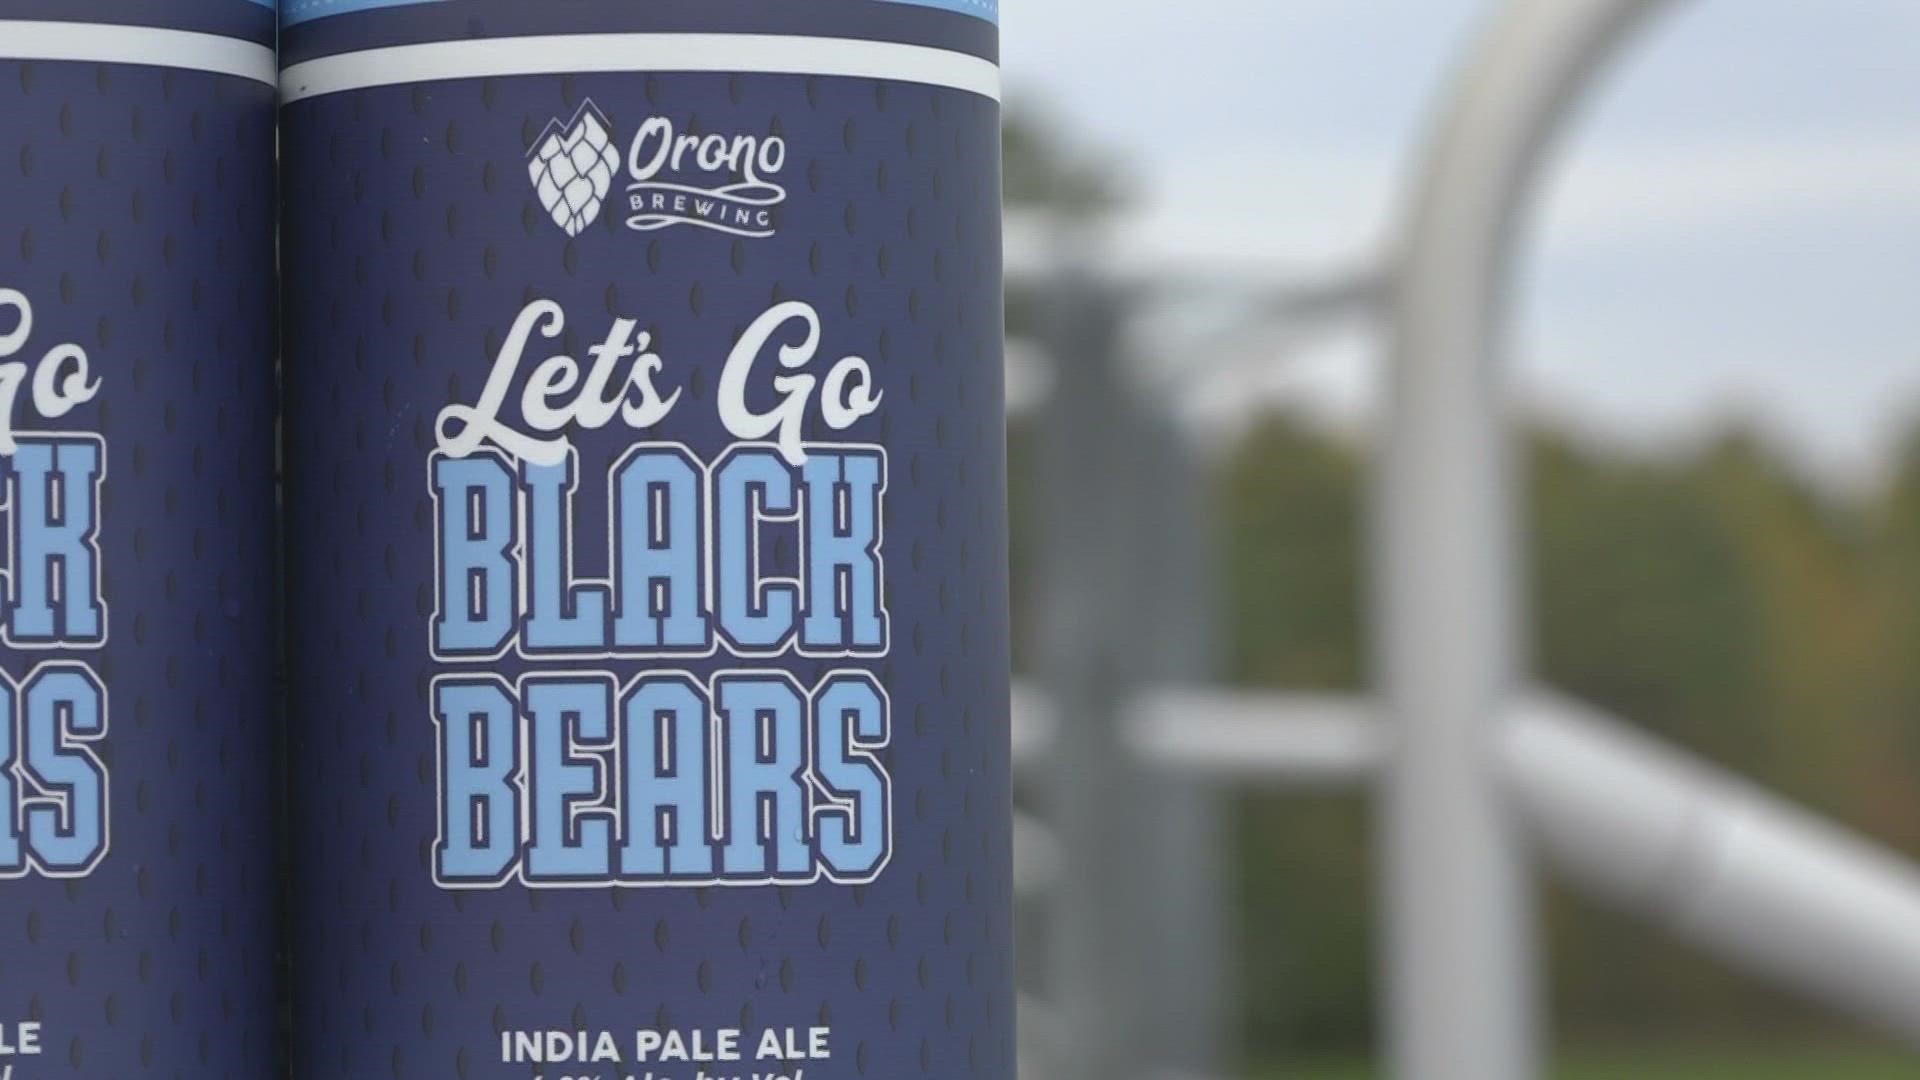 A portion of the "Lets Go Bears" IPA sales will go toward scholarships for Maine student athletes.